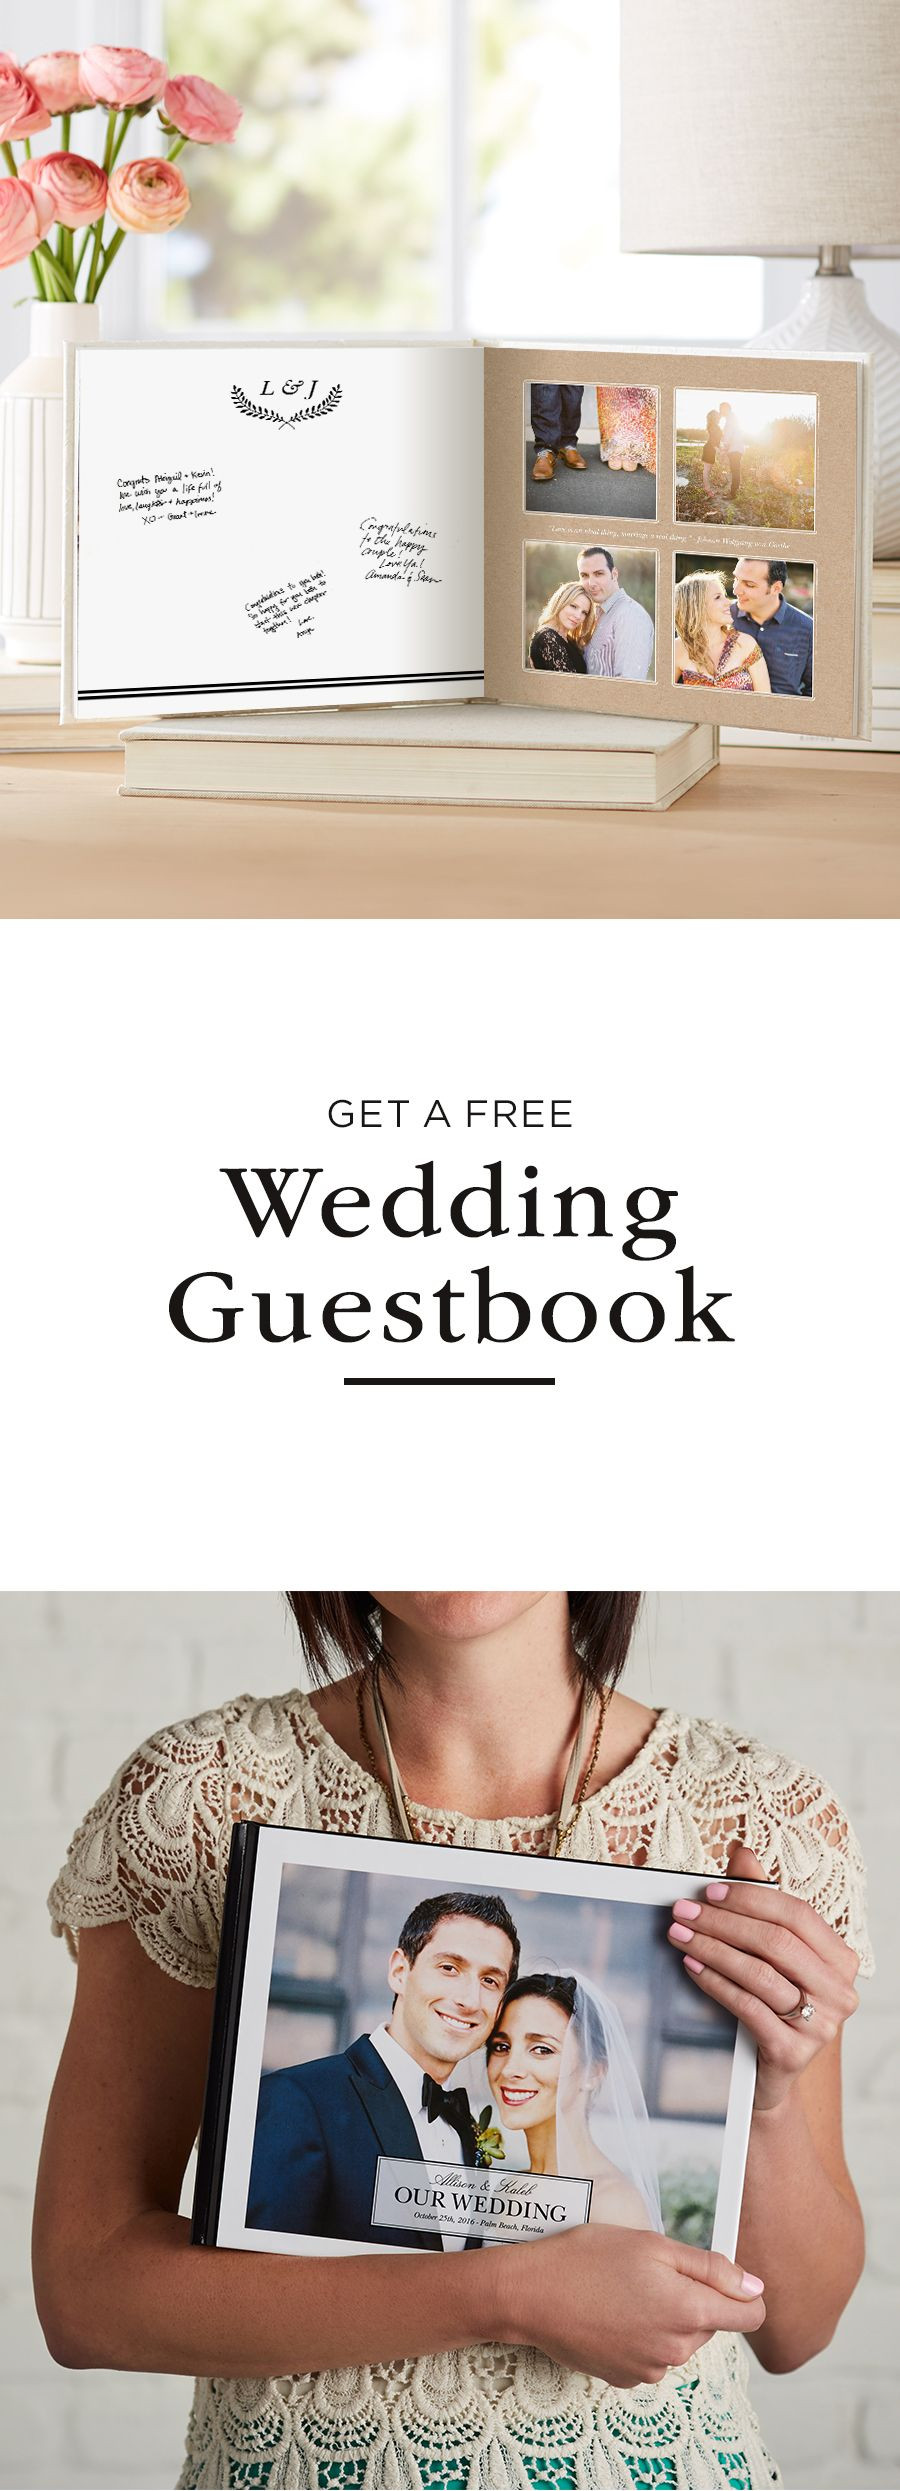 Shutterfly Free Wedding Guest Book
 Shutterfly wants to help celebrate your wedding Get a